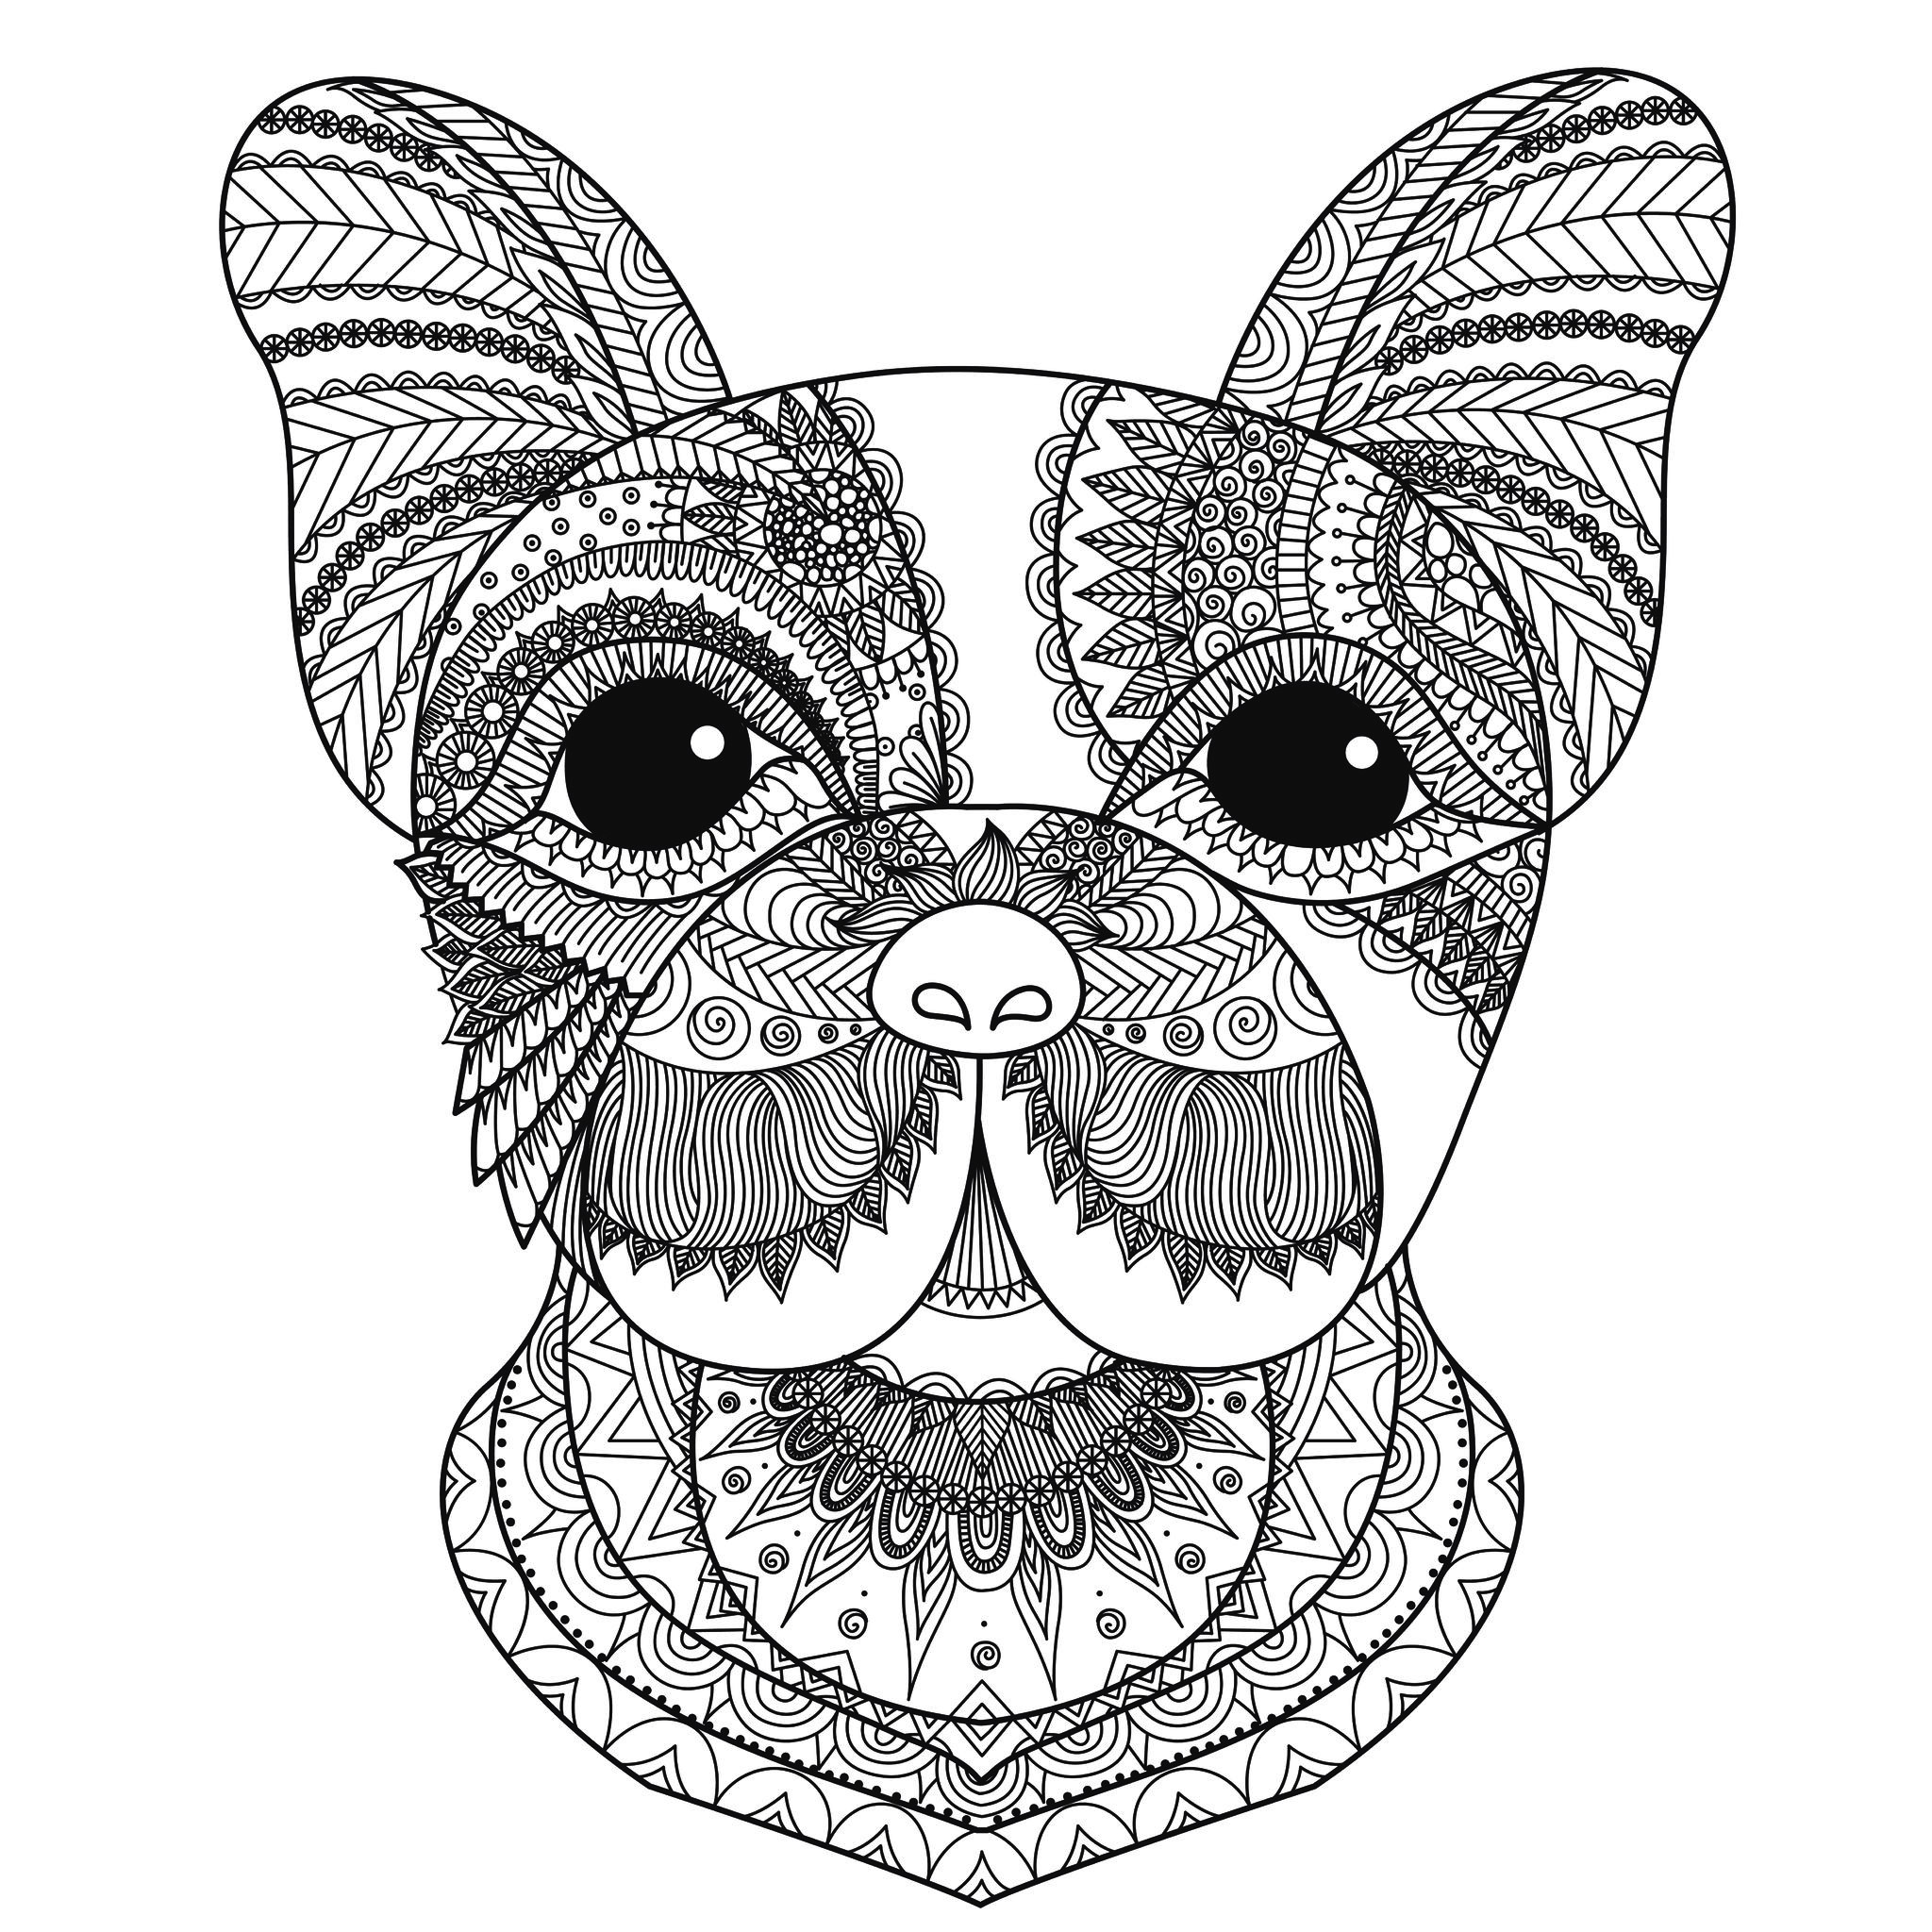 Download Dog head bimdeedee - Dogs Adult Coloring Pages